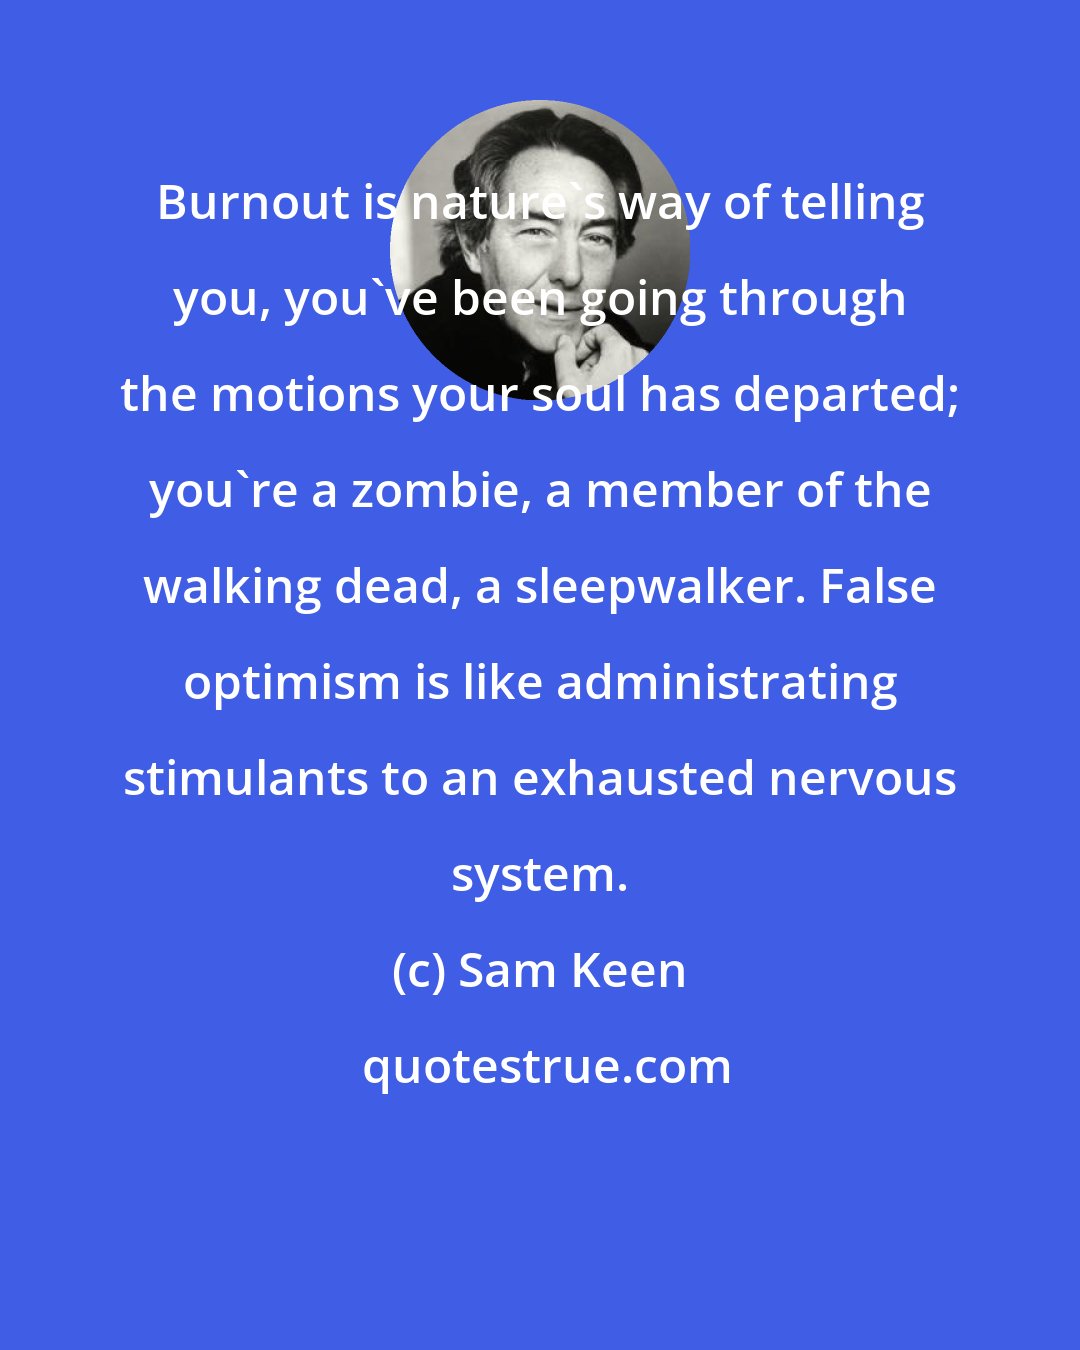 Sam Keen: Burnout is nature's way of telling you, you've been going through the motions your soul has departed; you're a zombie, a member of the walking dead, a sleepwalker. False optimism is like administrating stimulants to an exhausted nervous system.